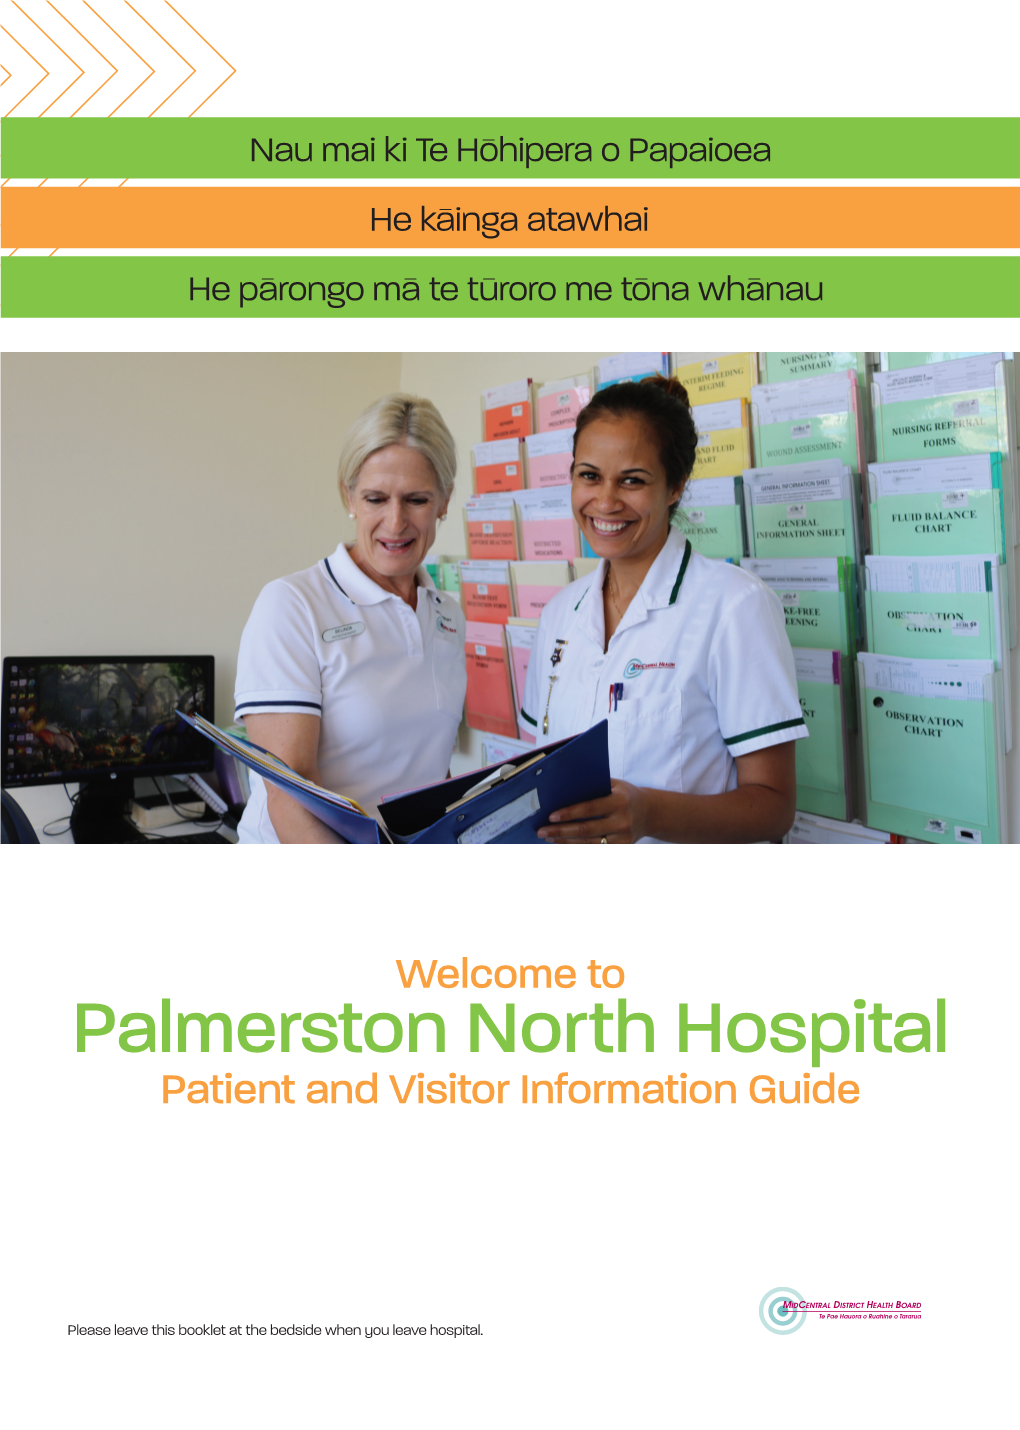 Palmerston North Hospital Patient and Visitor Information Guide